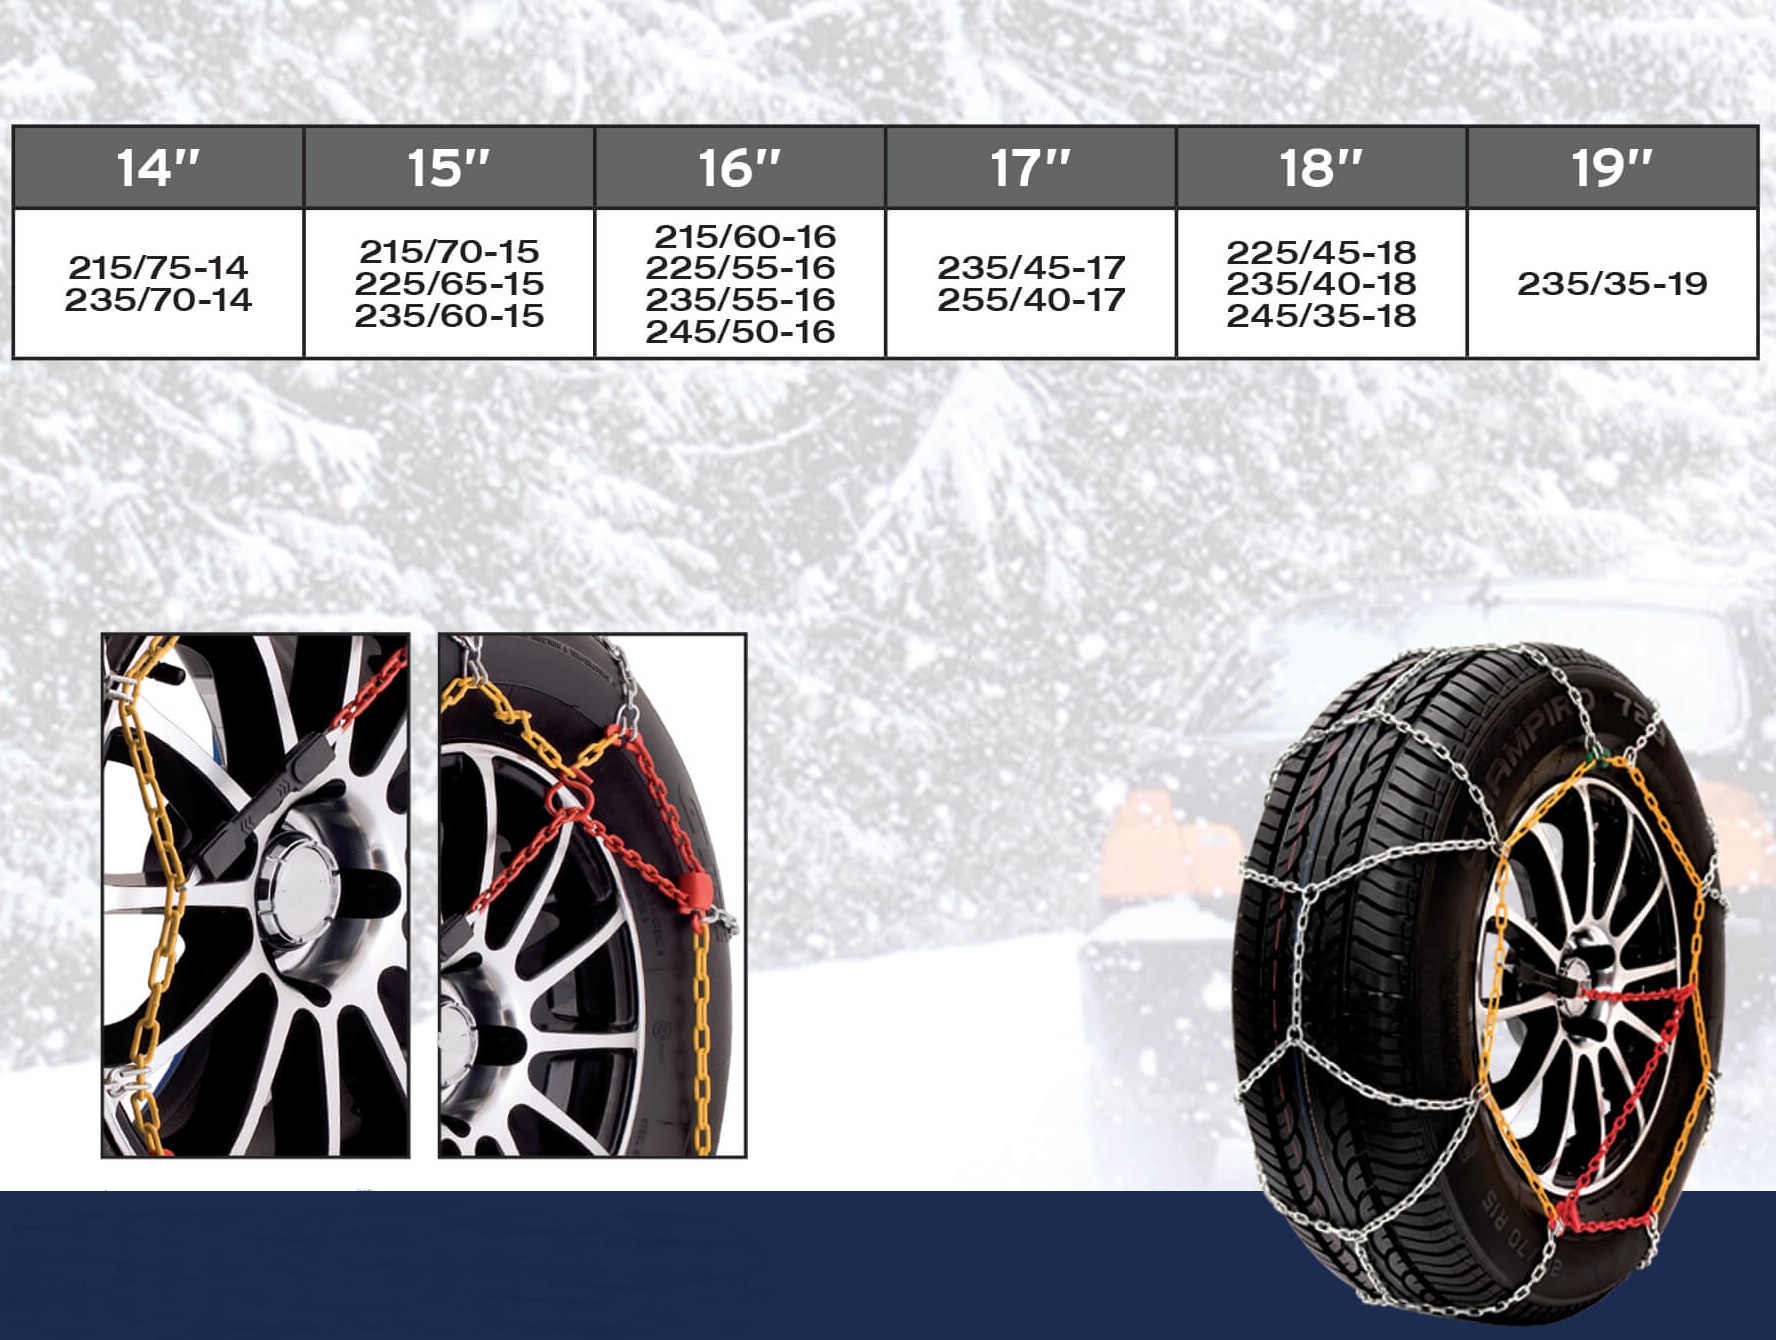  Chaines neige manuelle 9mm 215/60 R17-215 60 17-215 60 R17